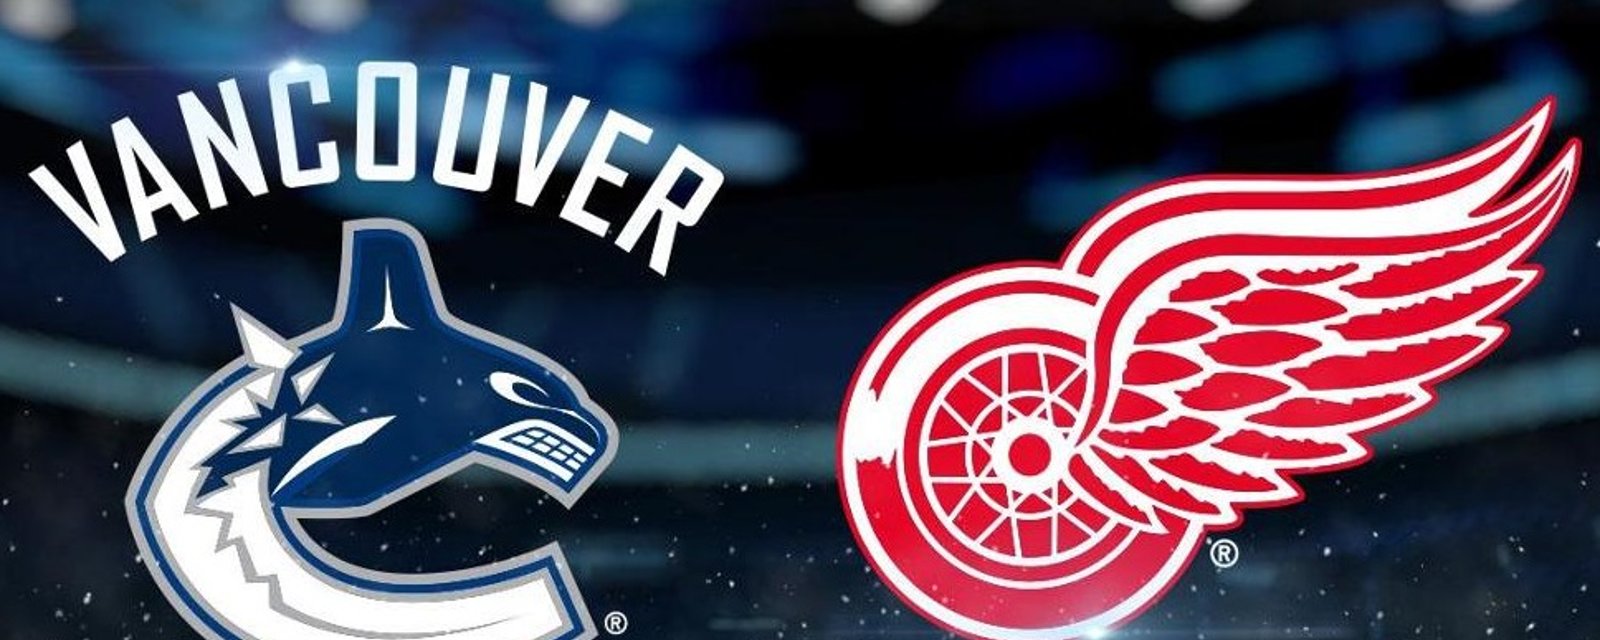 Full lineups for early game between Canucks and Red Wings.